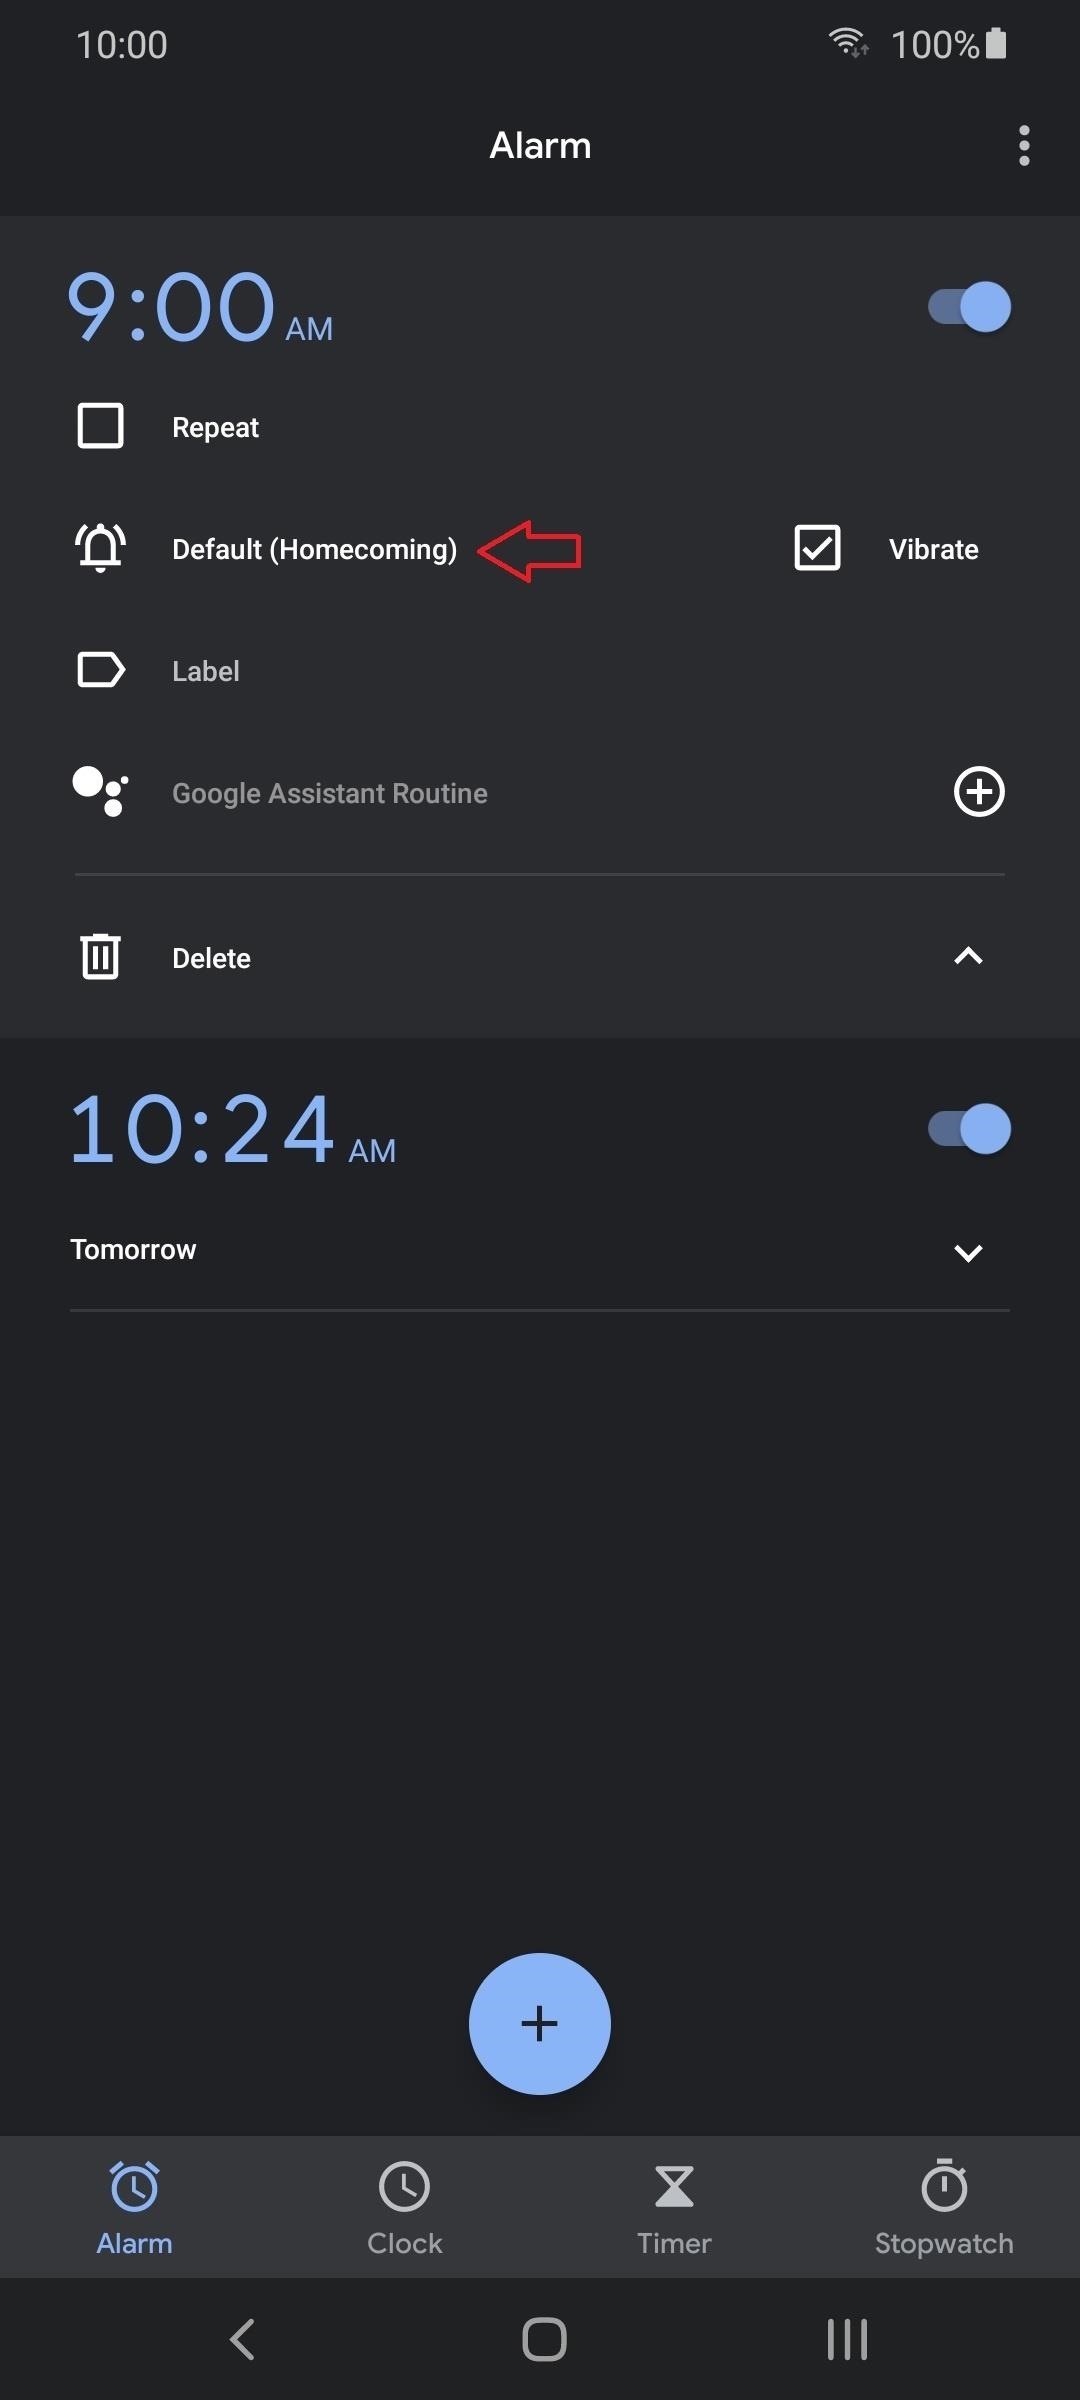 How to Replace Your Alarm with Your Favorite Song or Playlist on Android